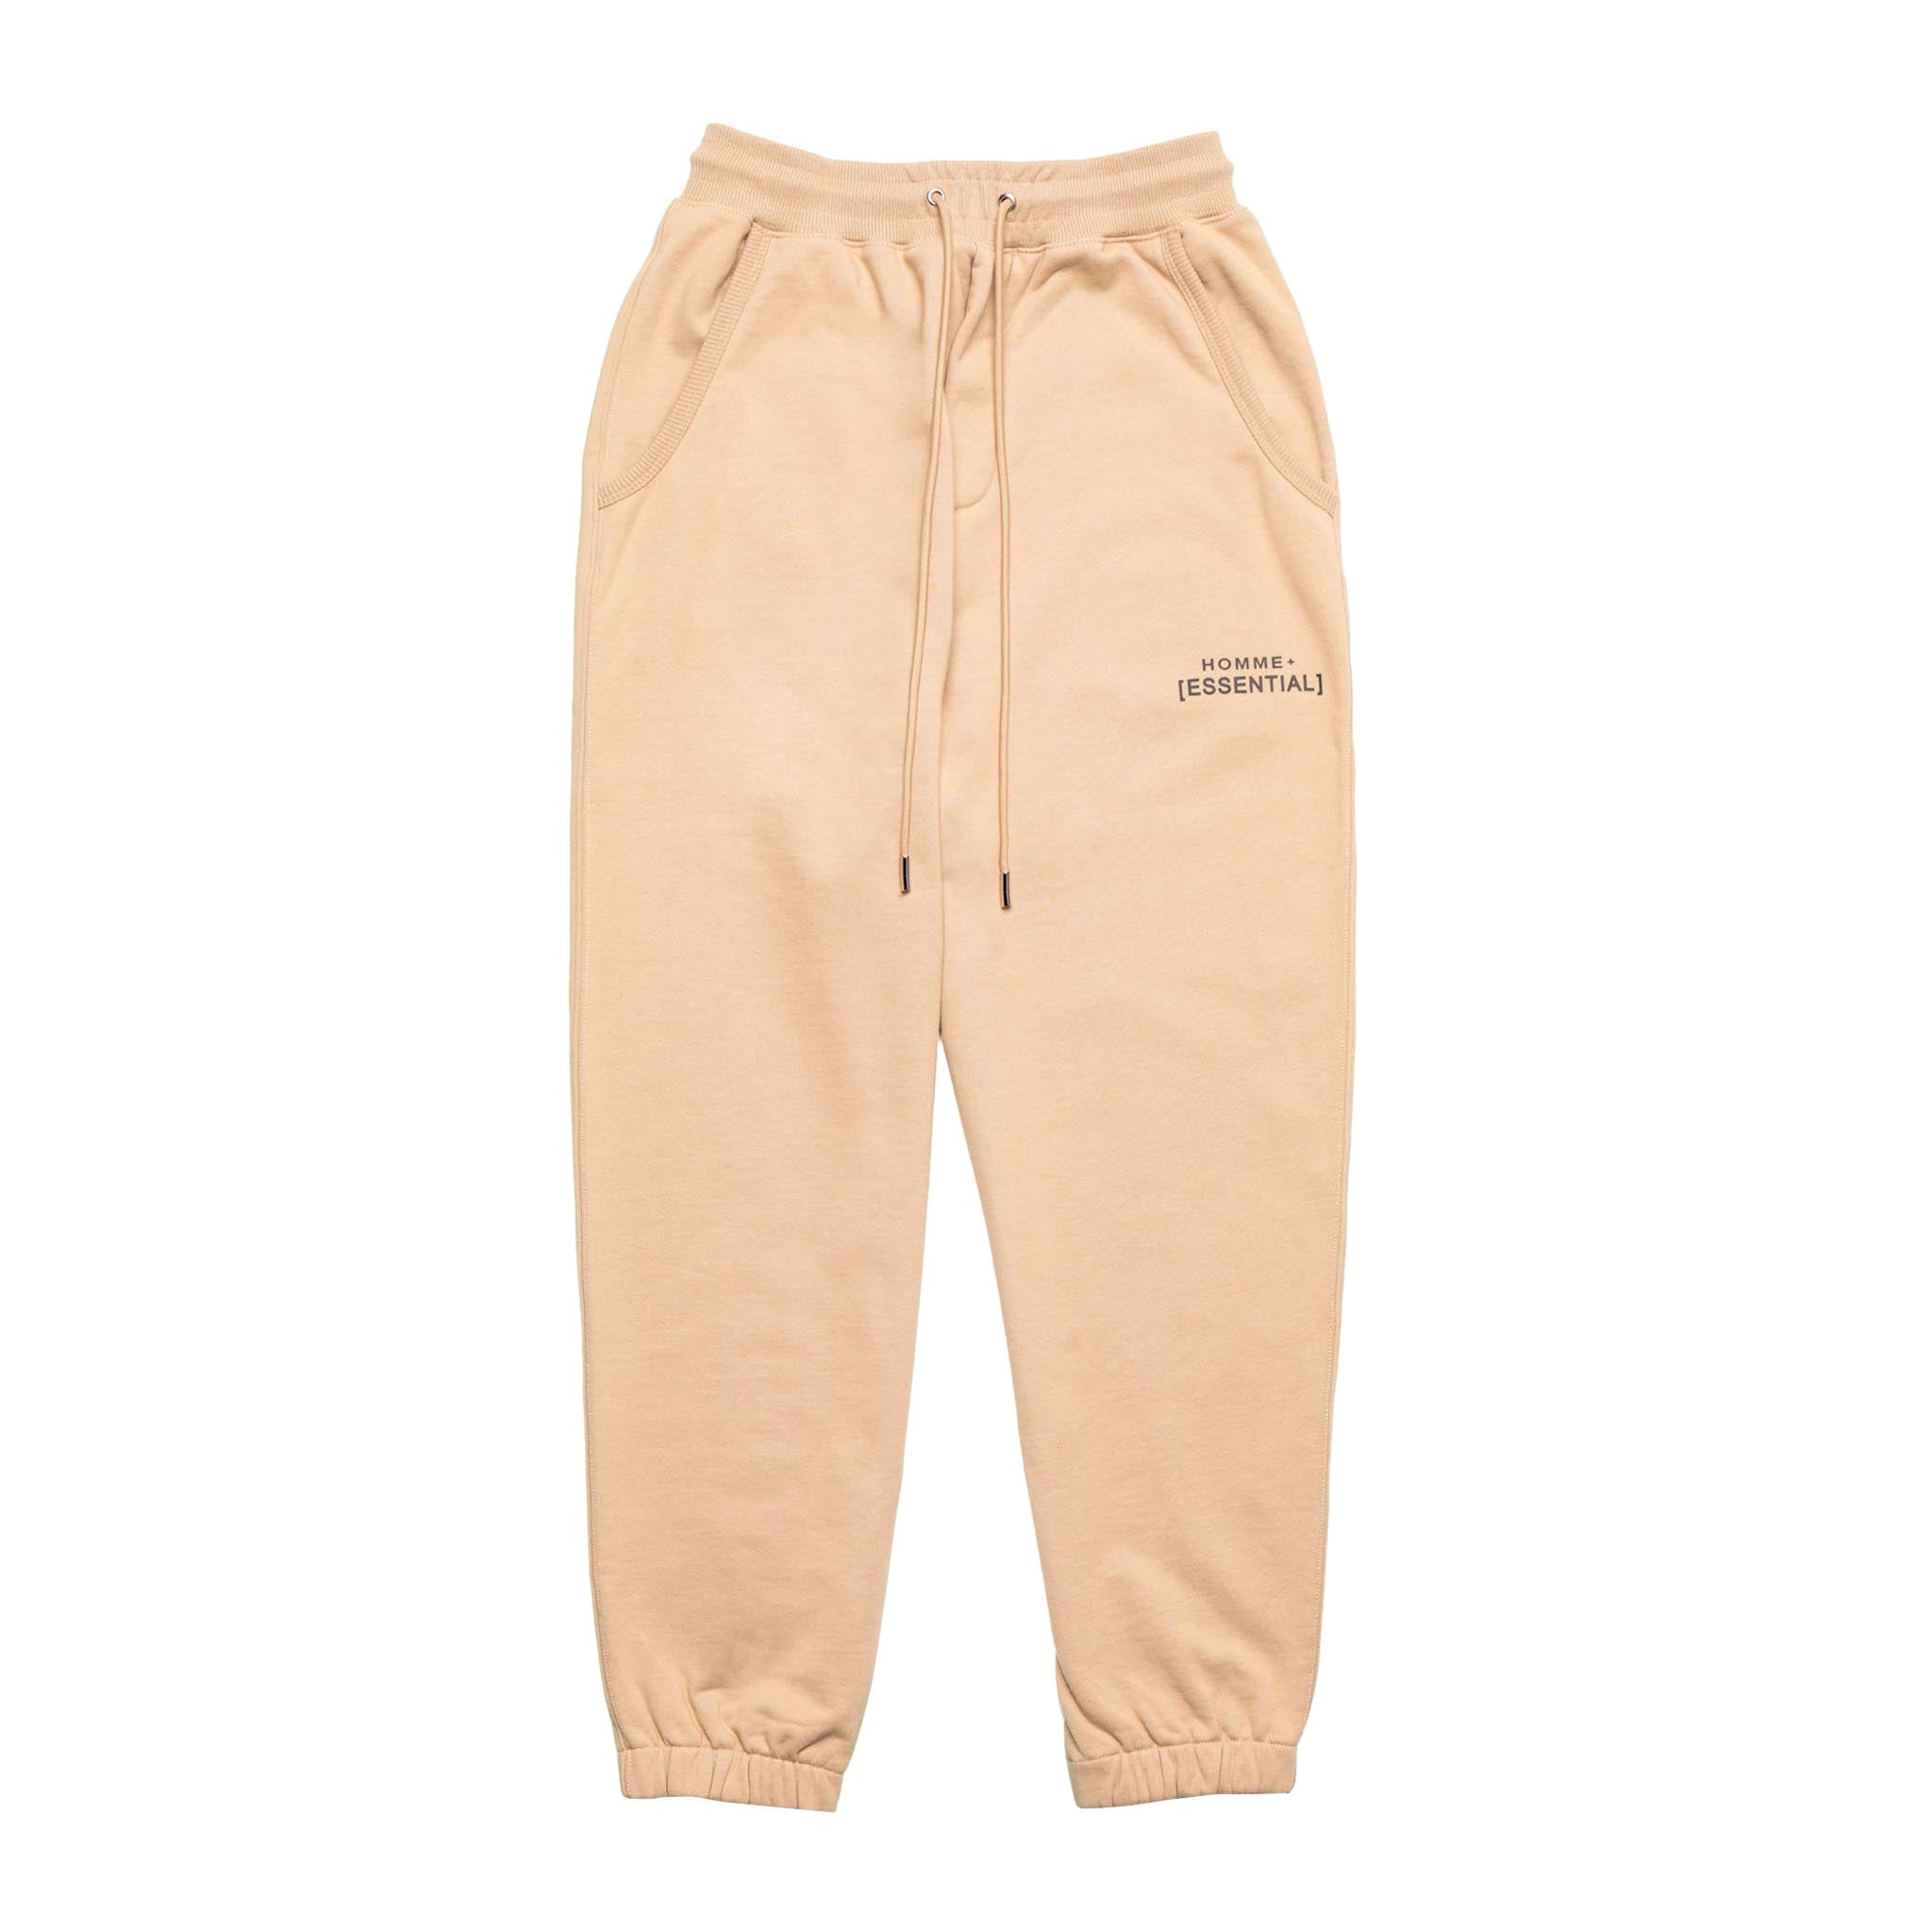 HOMME+ 'ESSENTIAL' Knit Jogger Beige